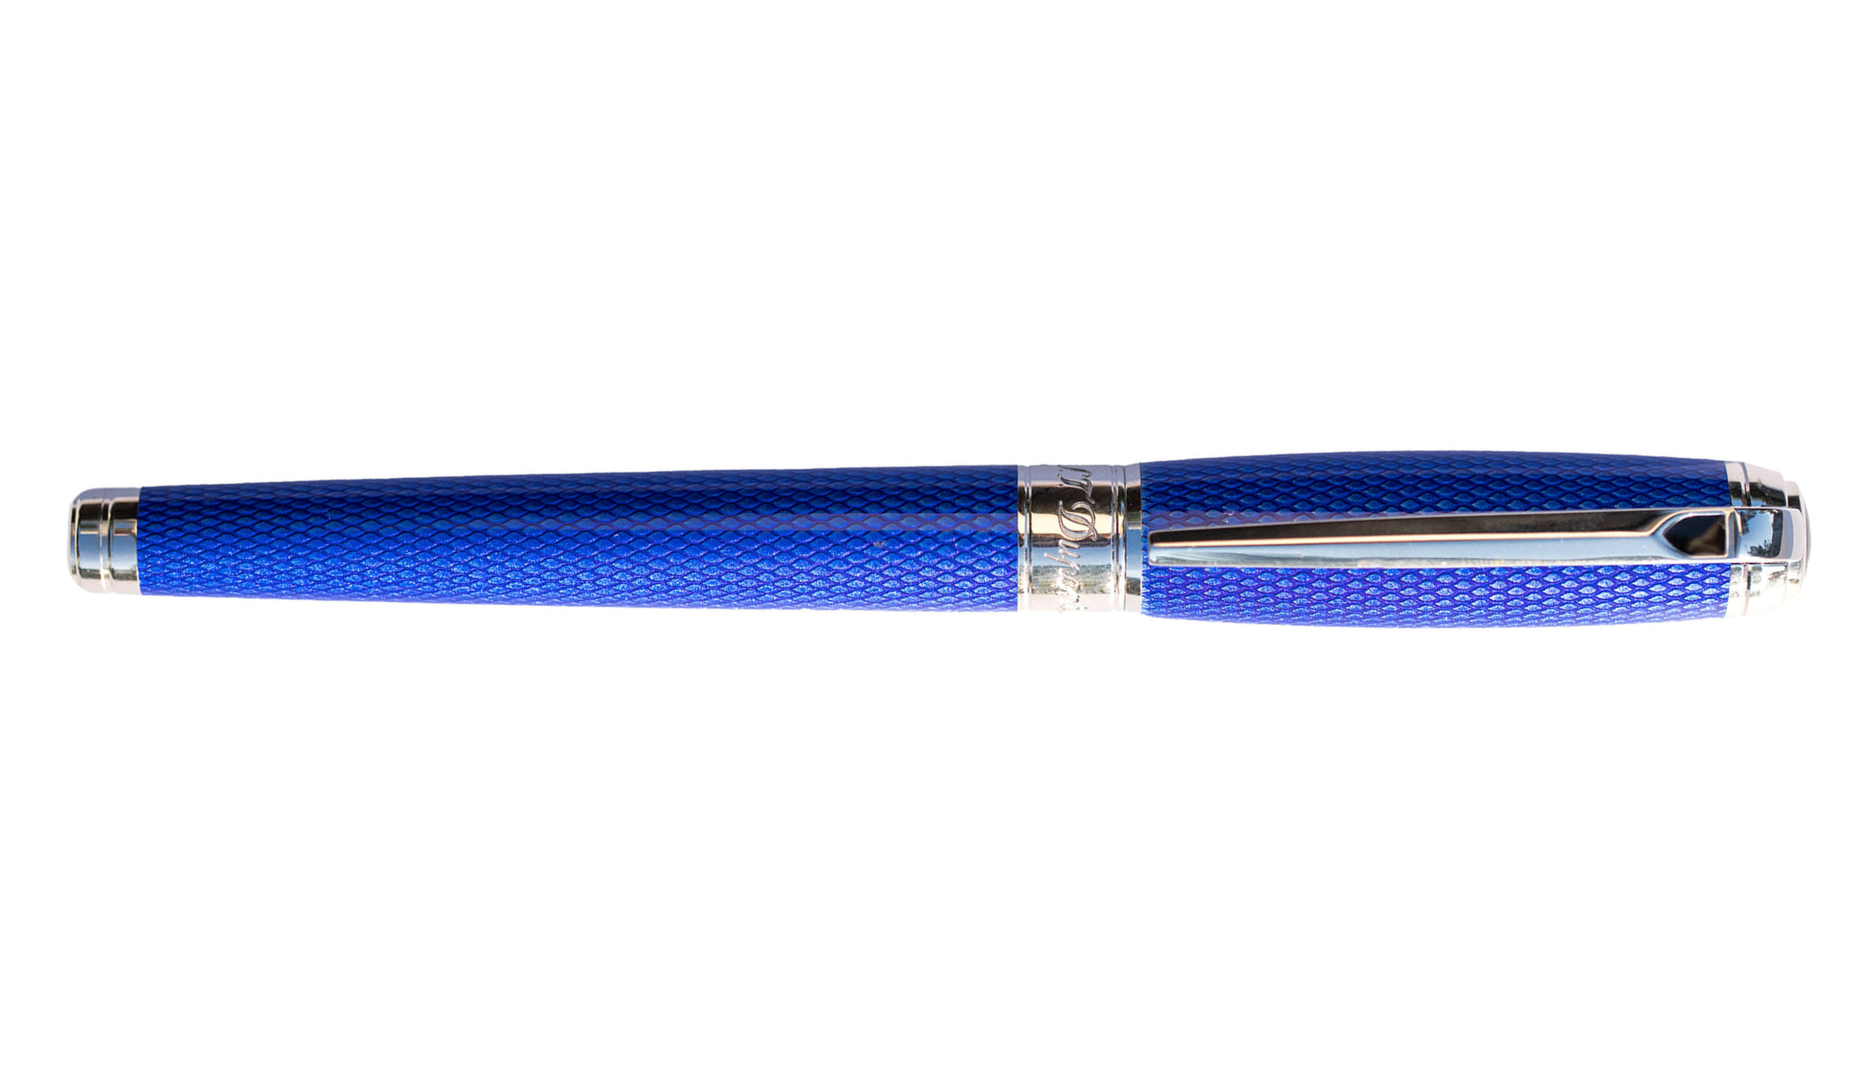 S.T. Dupont Line D Diamond Guilloche Sapphire Rollerball